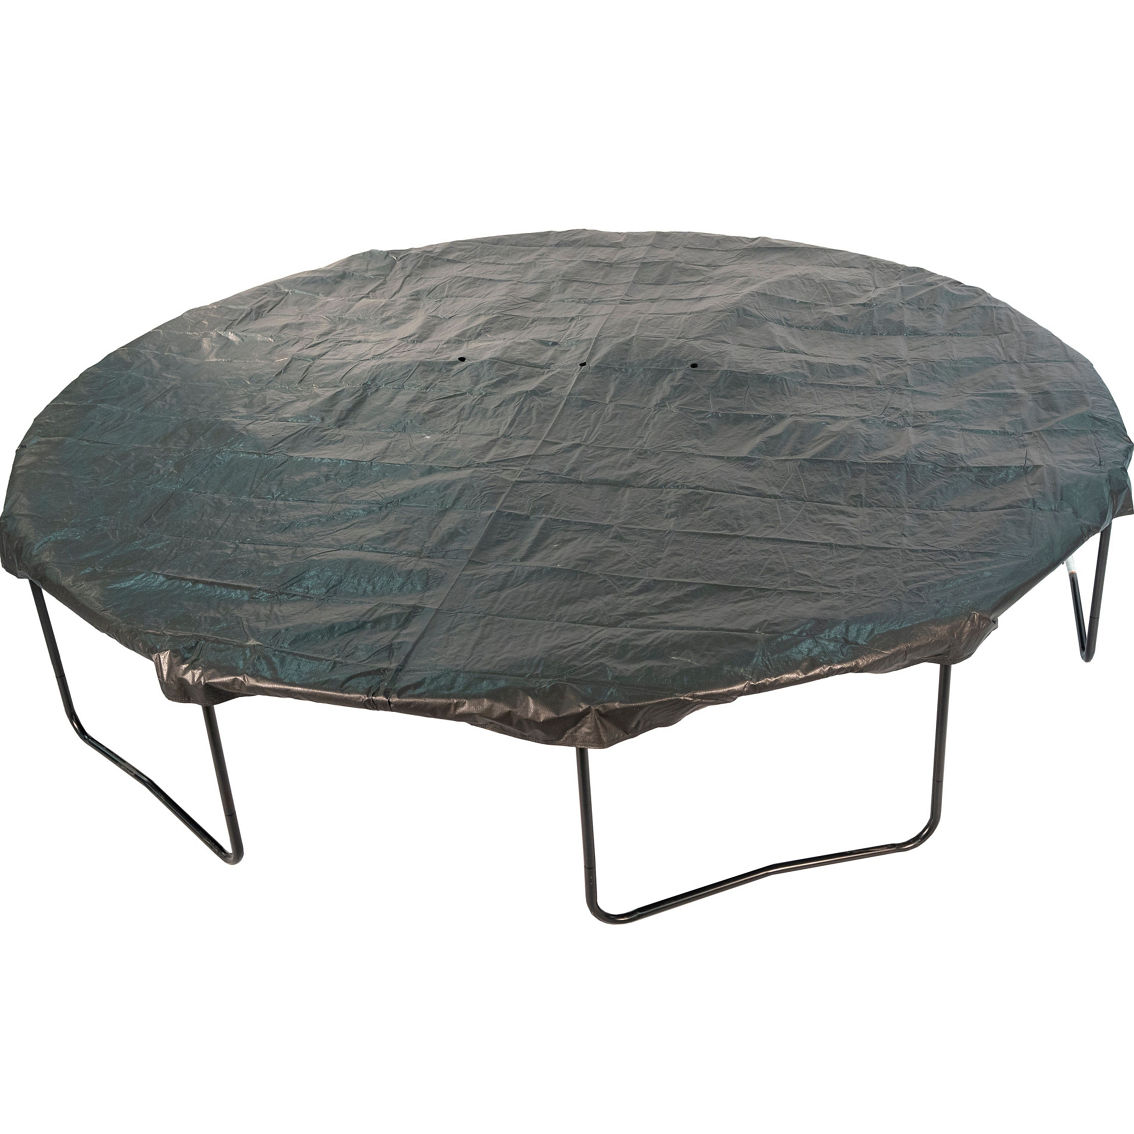 JumpKing 14' Trampoline Weather Cover - Image 2 of 2